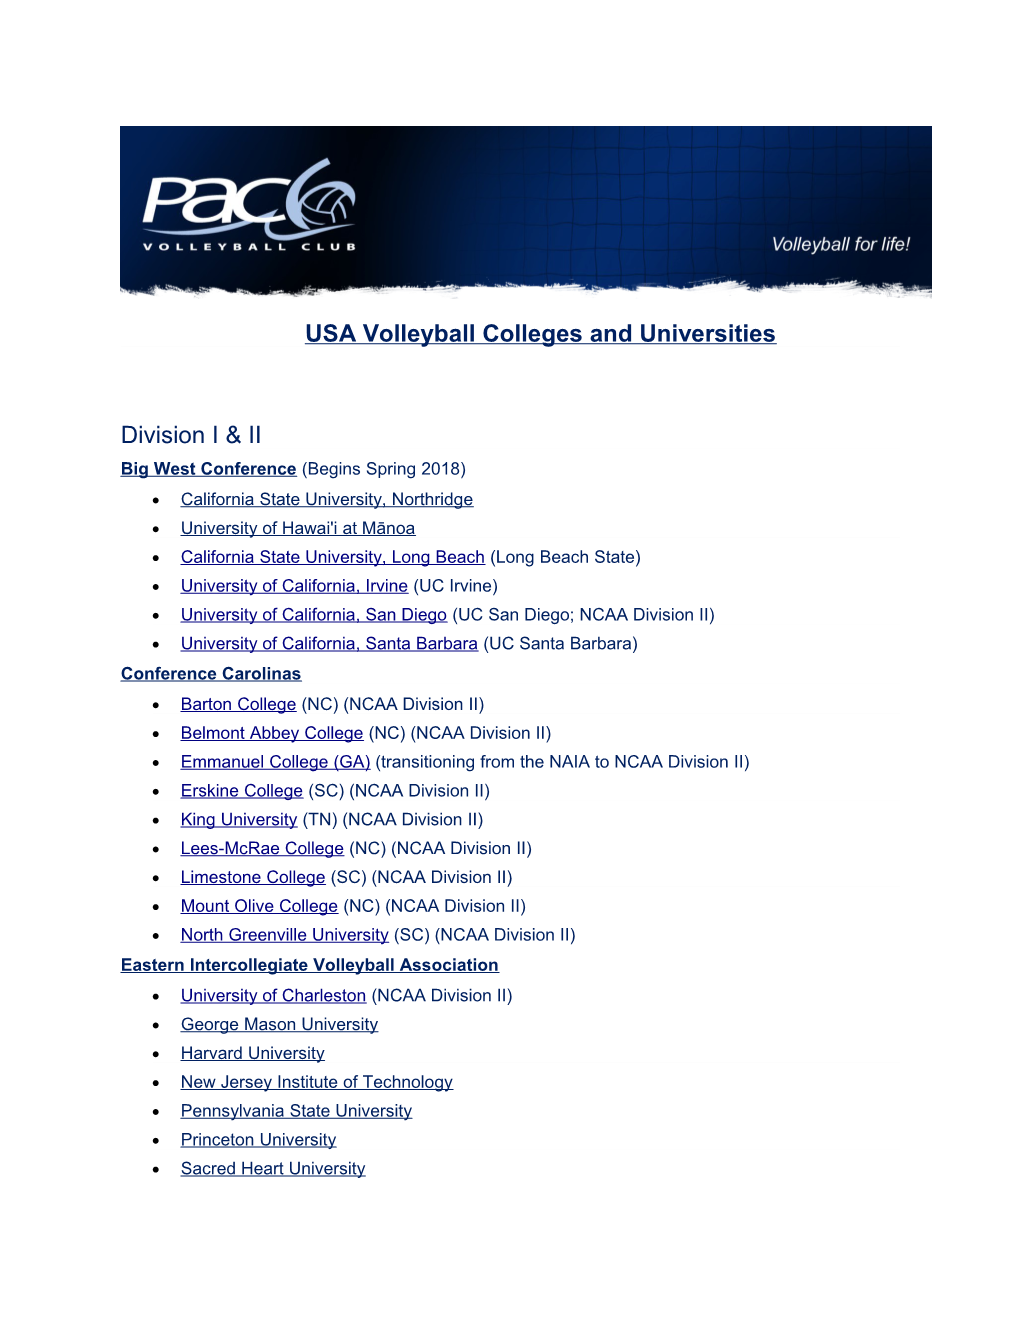 USA Volleyball Colleges and Universities